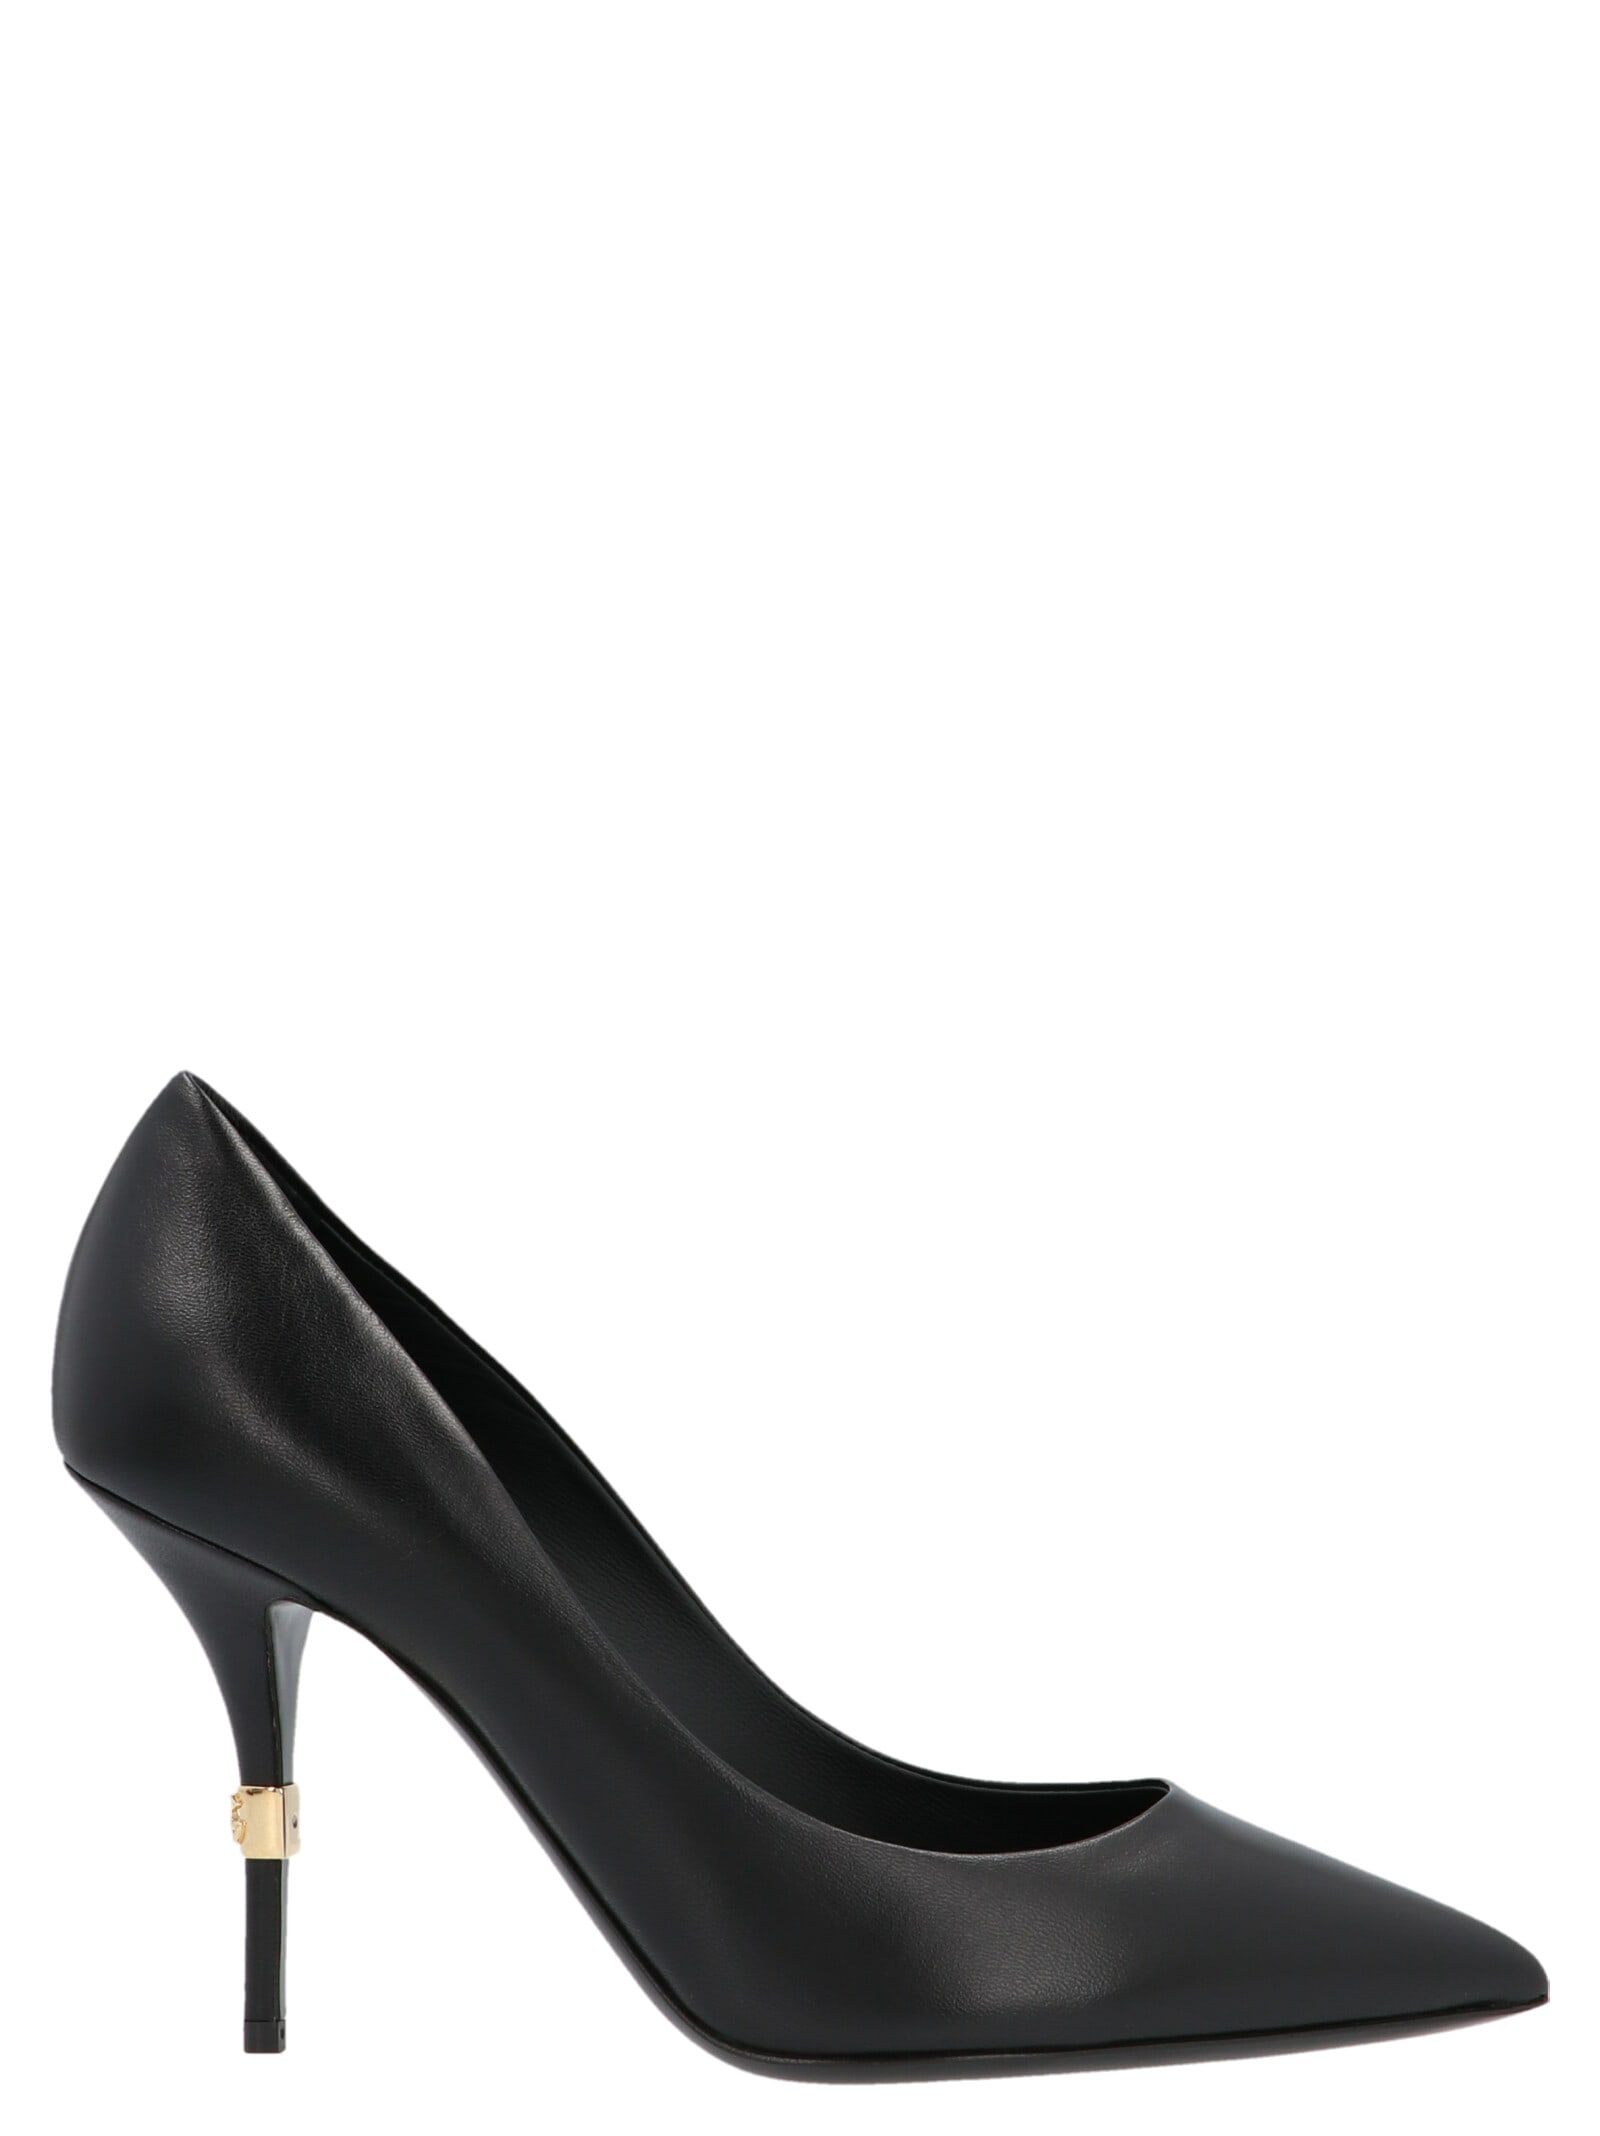 Buy Dolce & Gabbana capretto Lissato Shoes online, shop Dolce & Gabbana shoes with free shipping